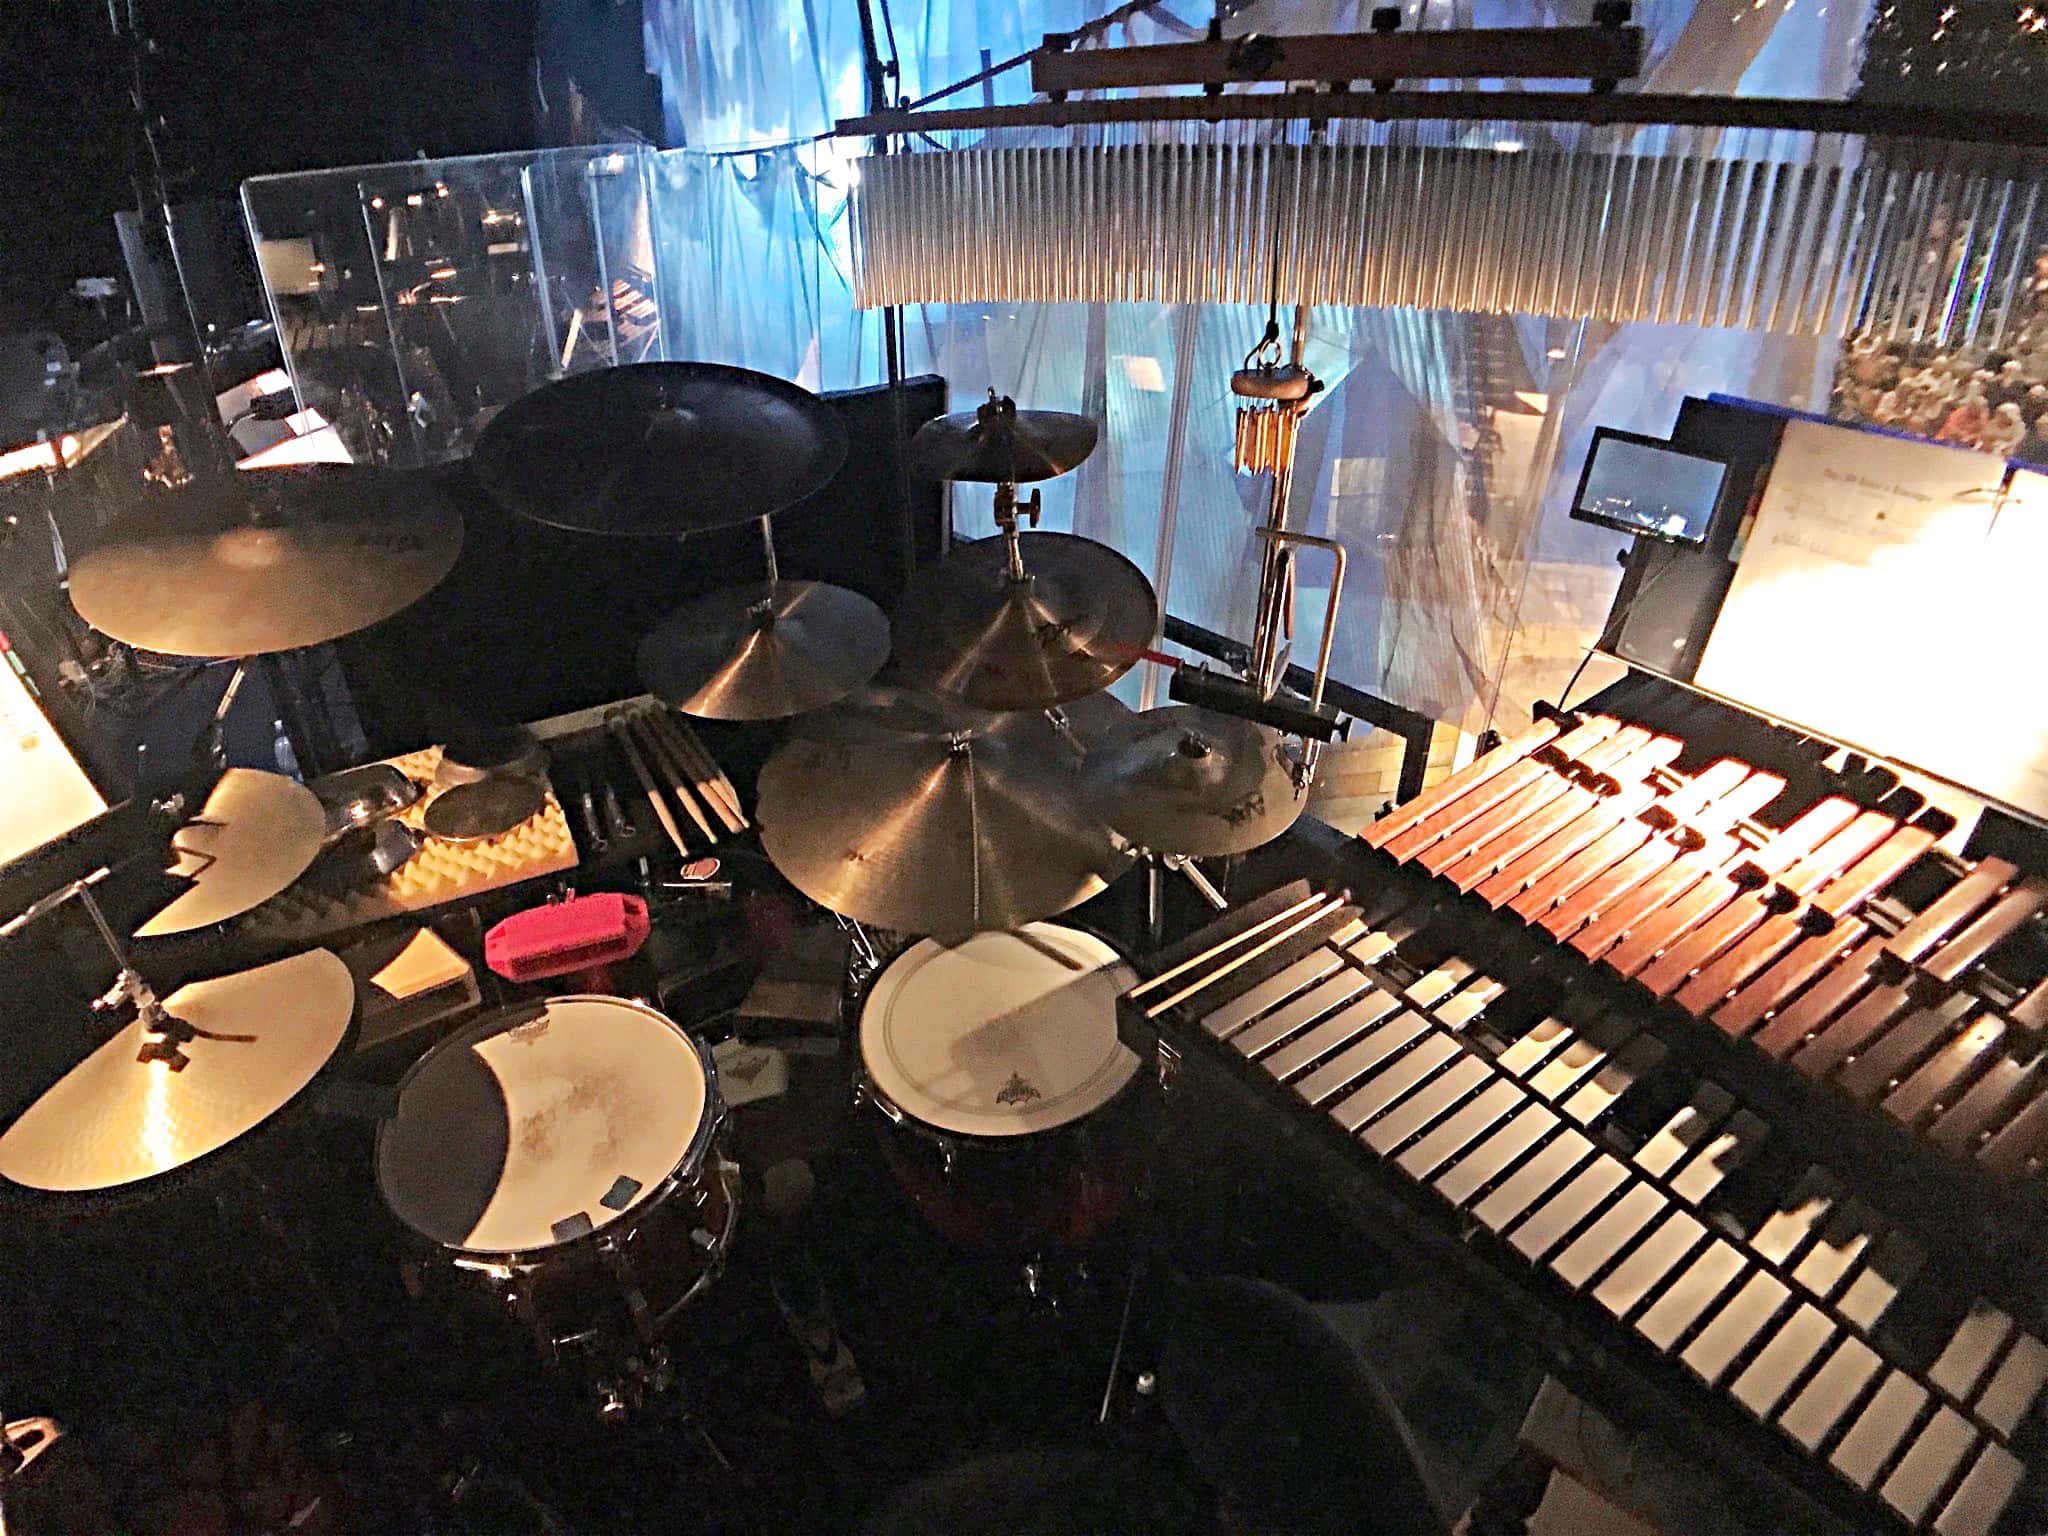 George English’s setup for The Wizard of Oz at the Crucible Theatre in Sheffield, South Yorkshire, England.